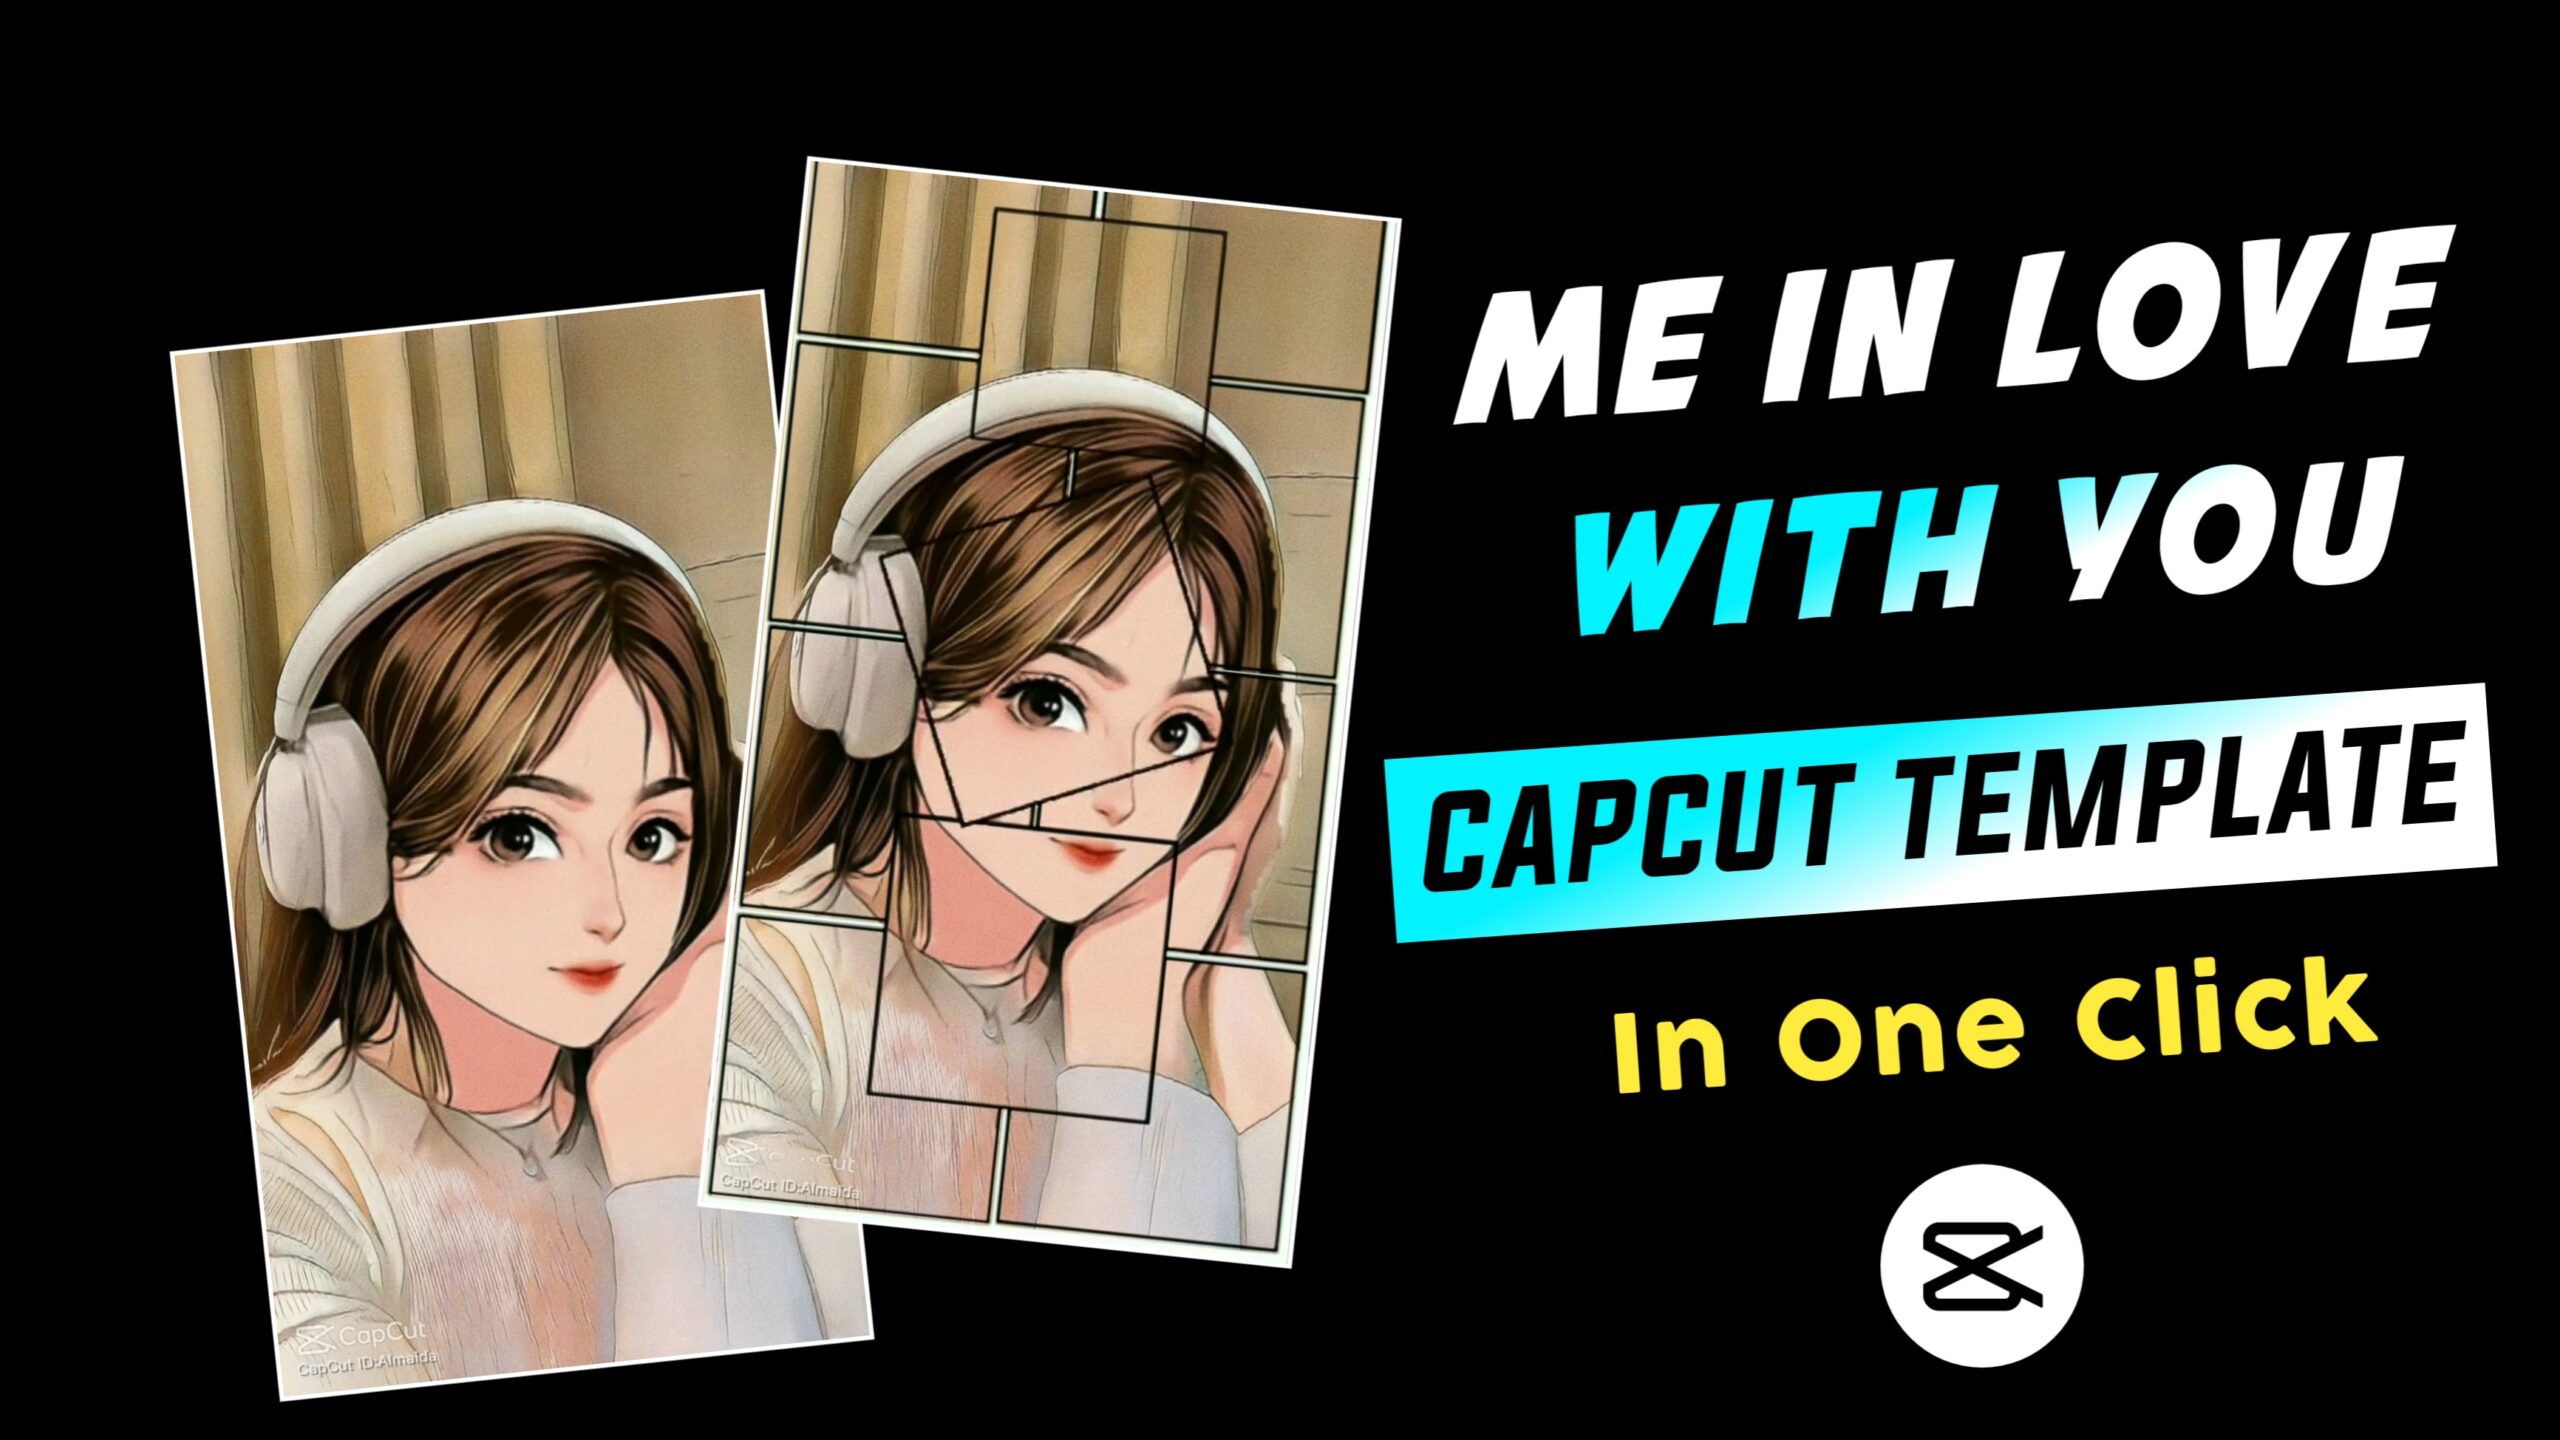 Me In Love With You CapCut Template